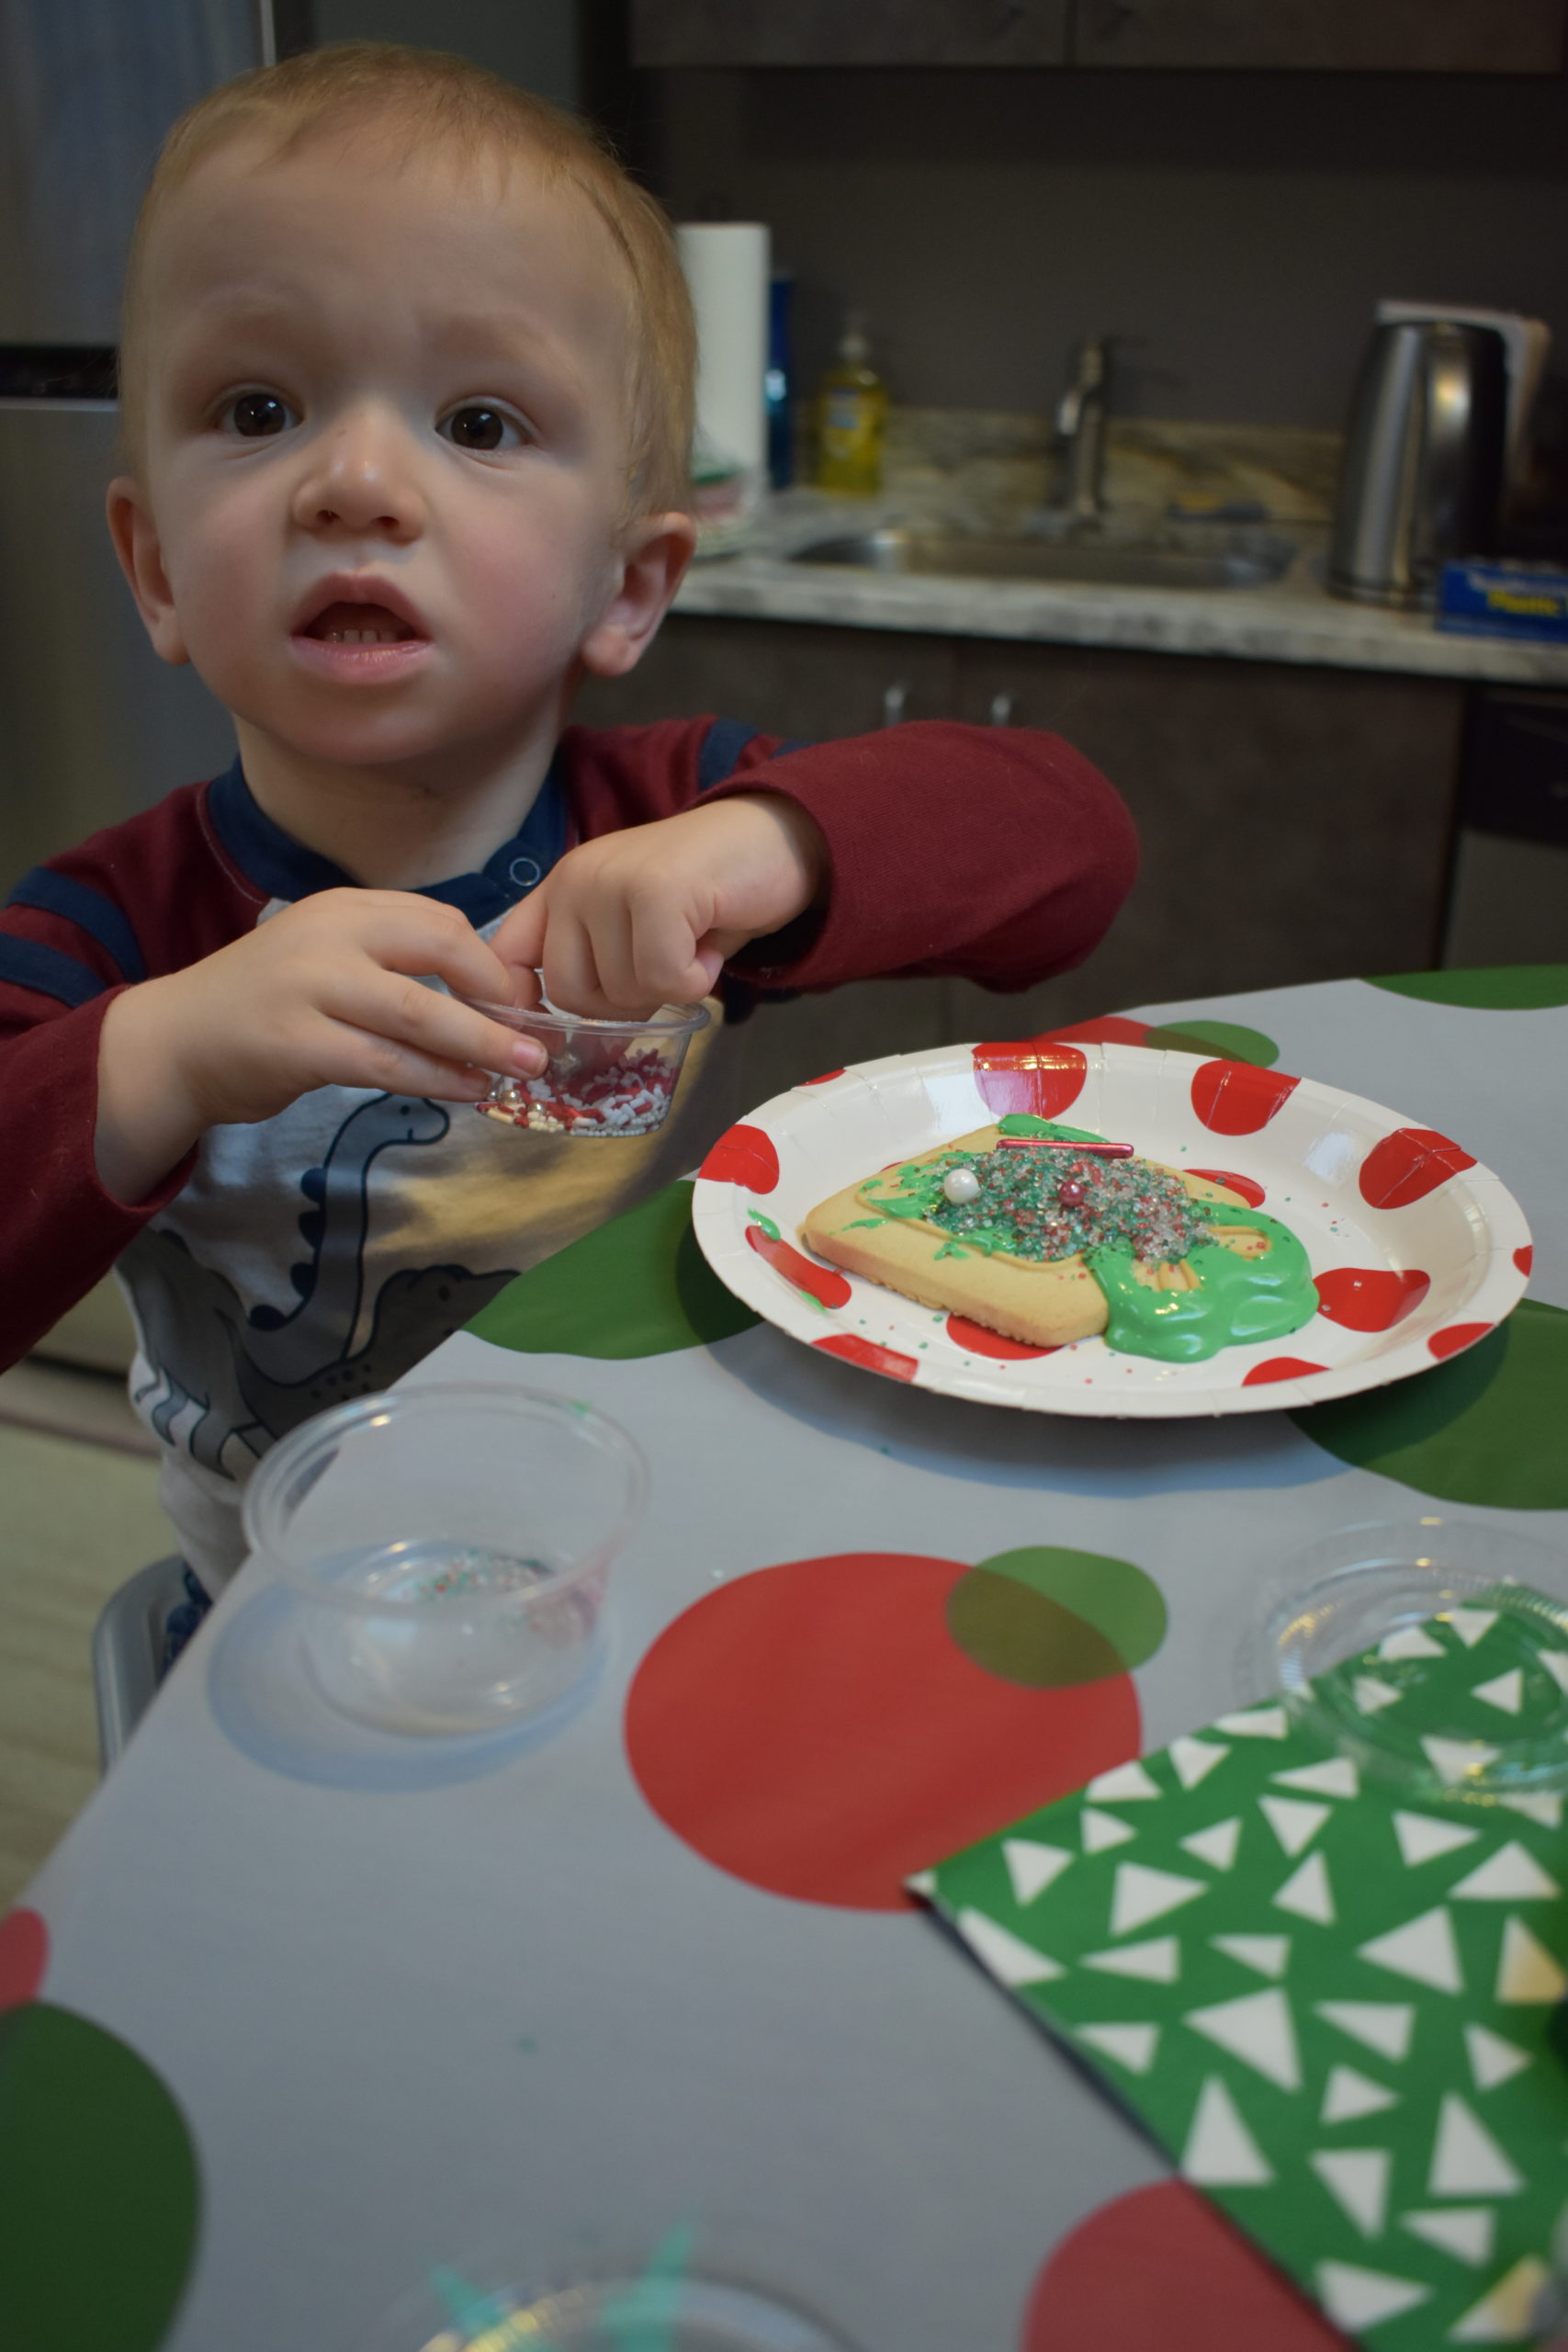 A toddler decorates cookies with sprinkles